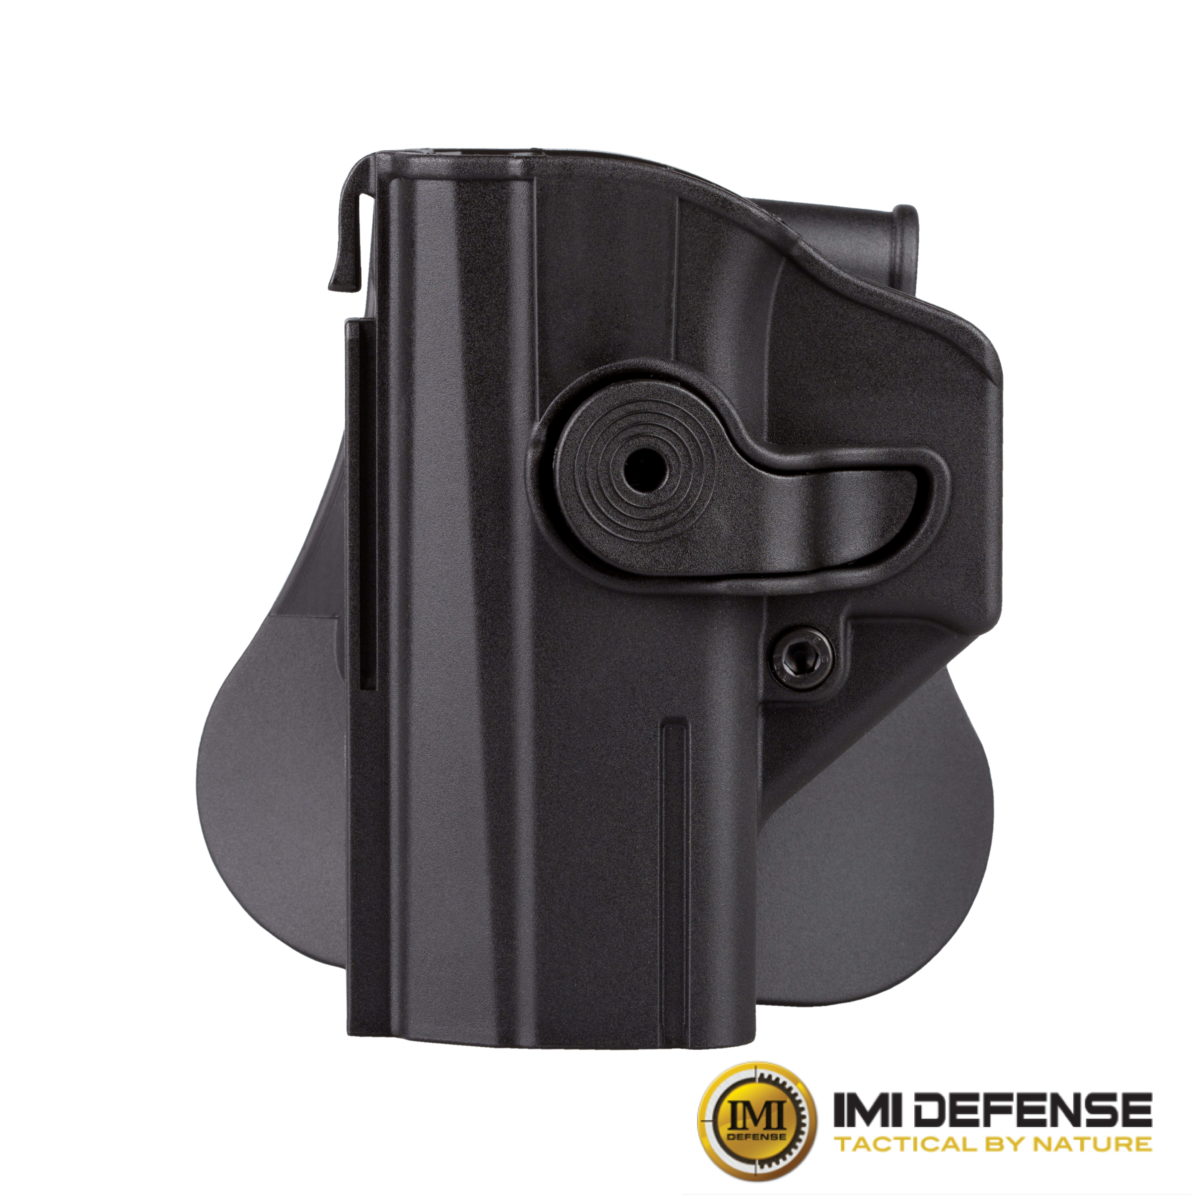 IMI Defense Level 2 Paddle LEFT HAND Holster for CZ P-07 IMI-Z1460 LH 